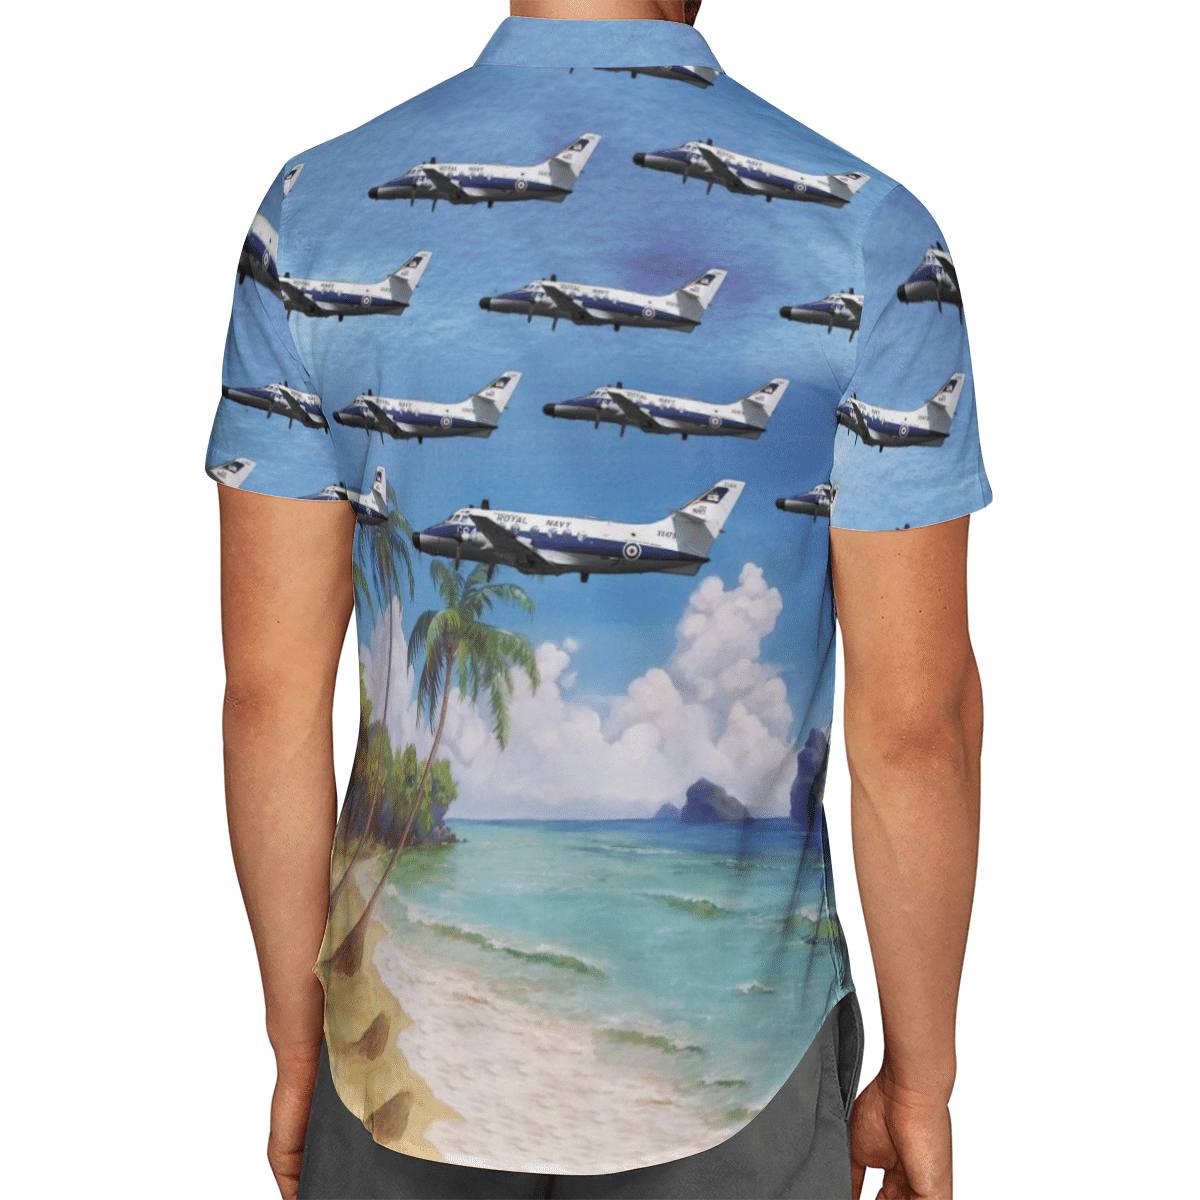 Going to the beach with a quality shirt 129